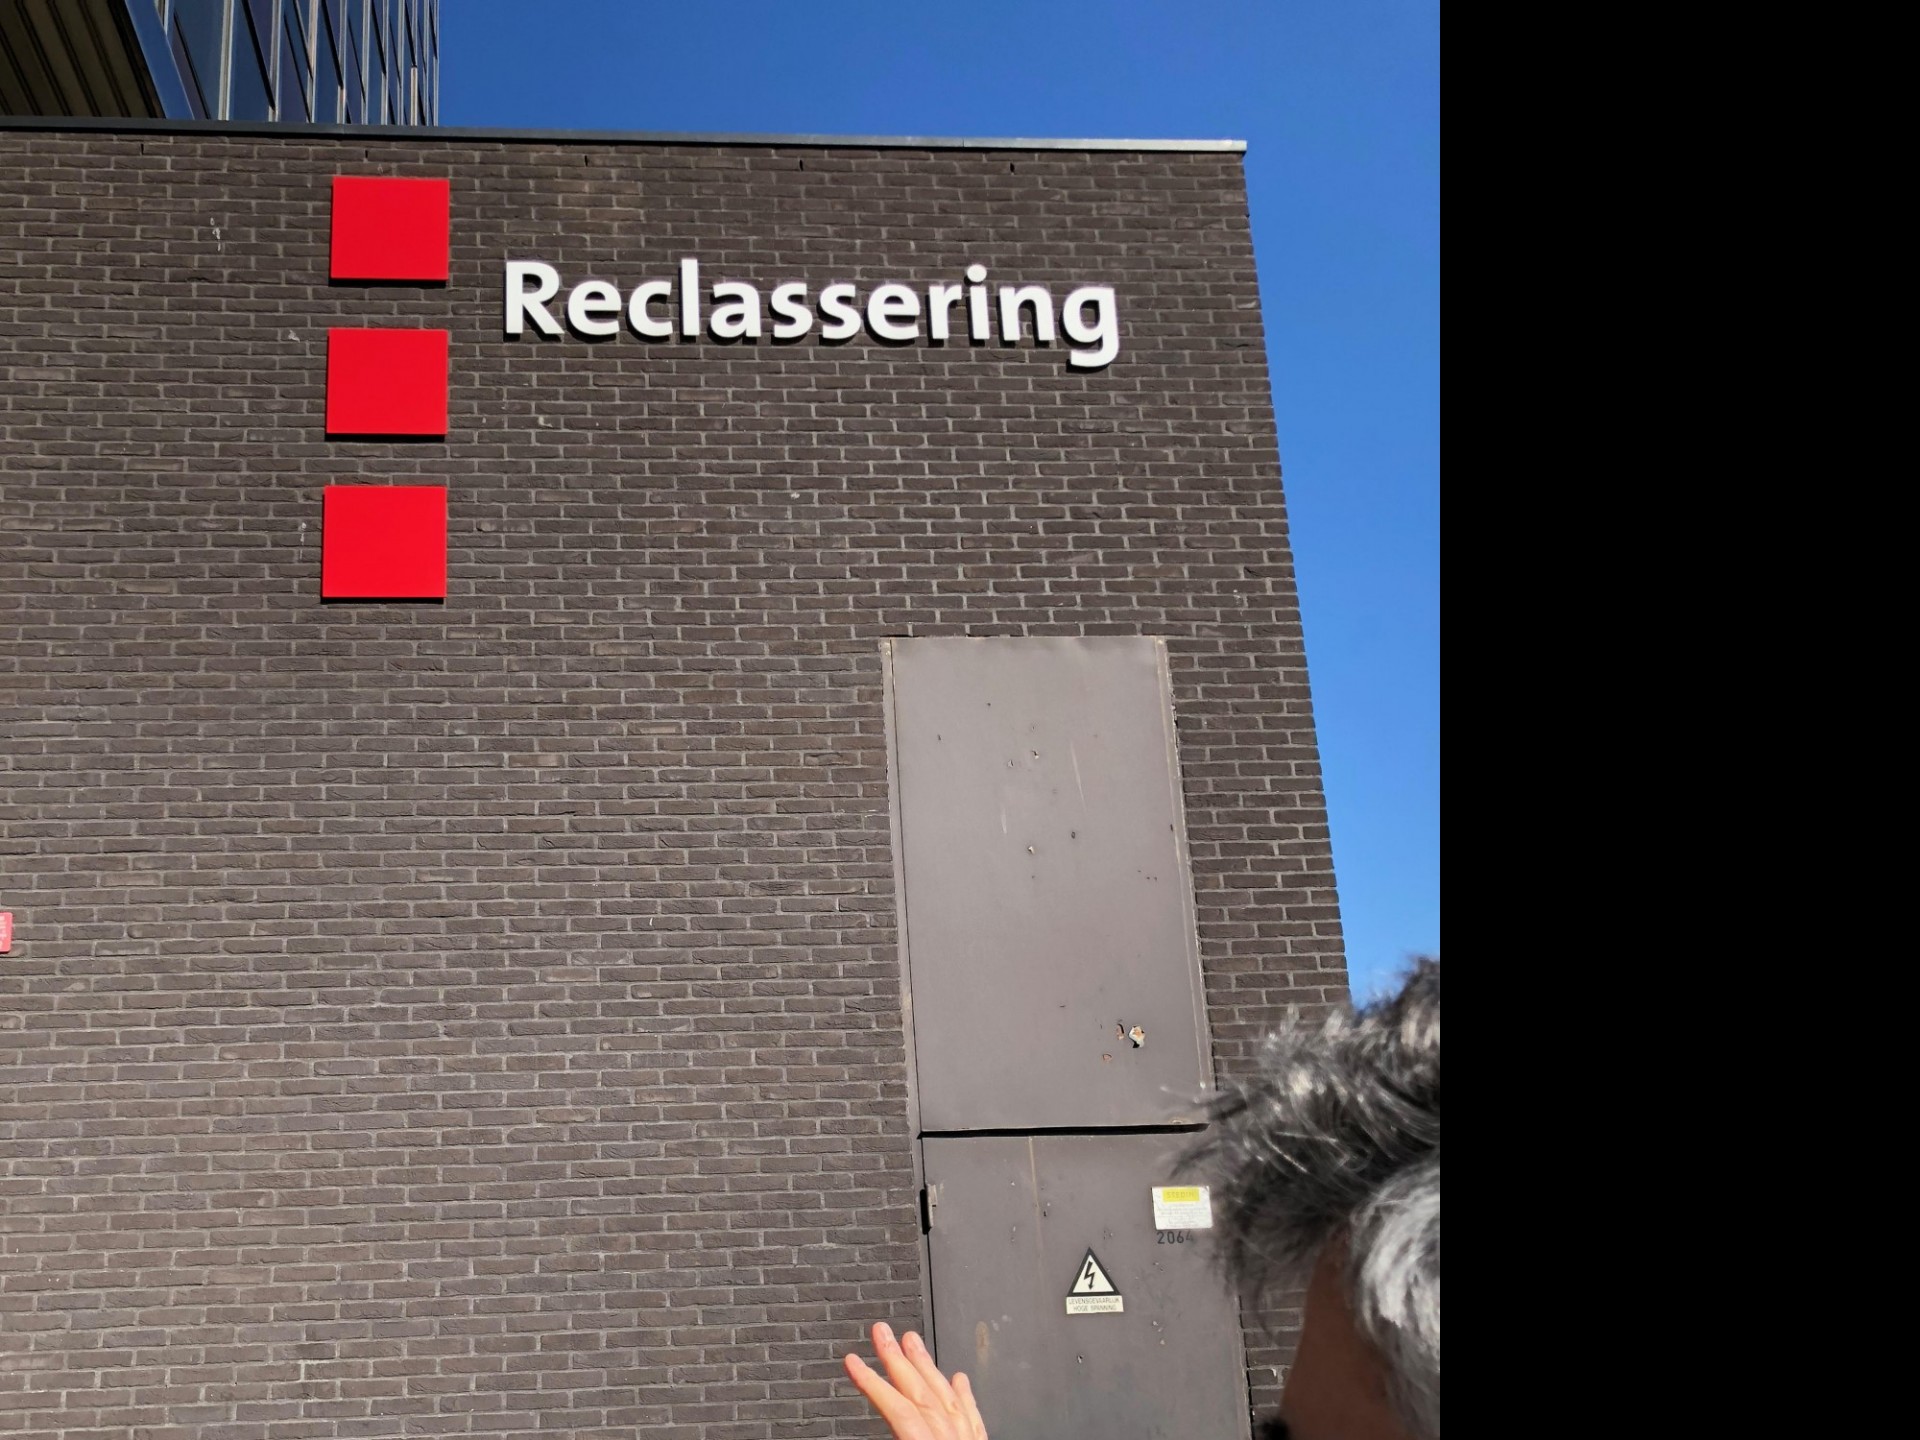 A building named Reclassering, or Probation